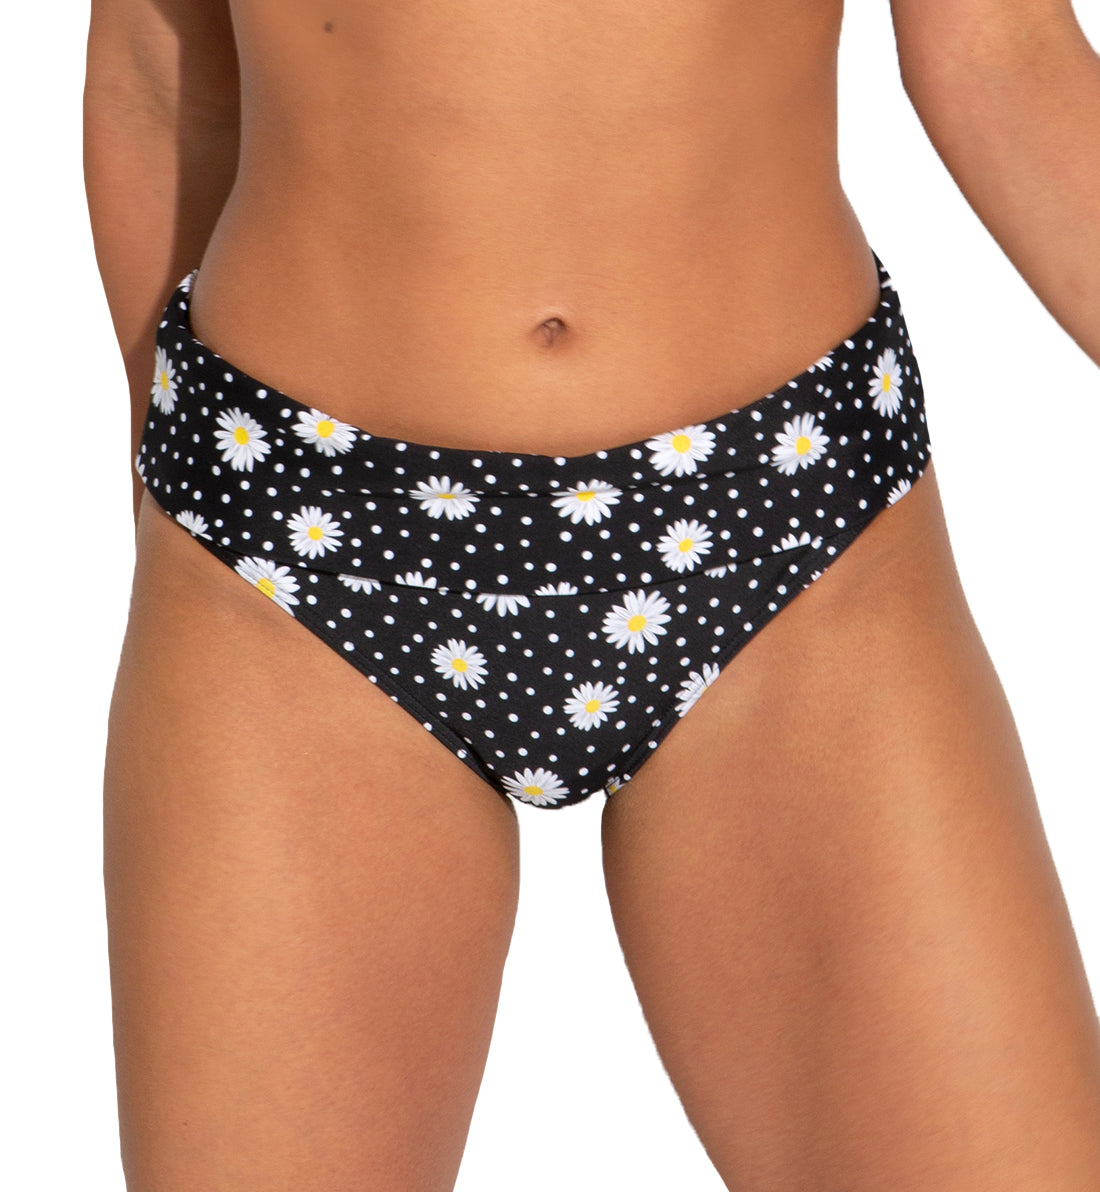 Pour Moi Out Of Office Fold Over Swim Brief (24504),Small,Daisy Spot - Daisy Spot,Small